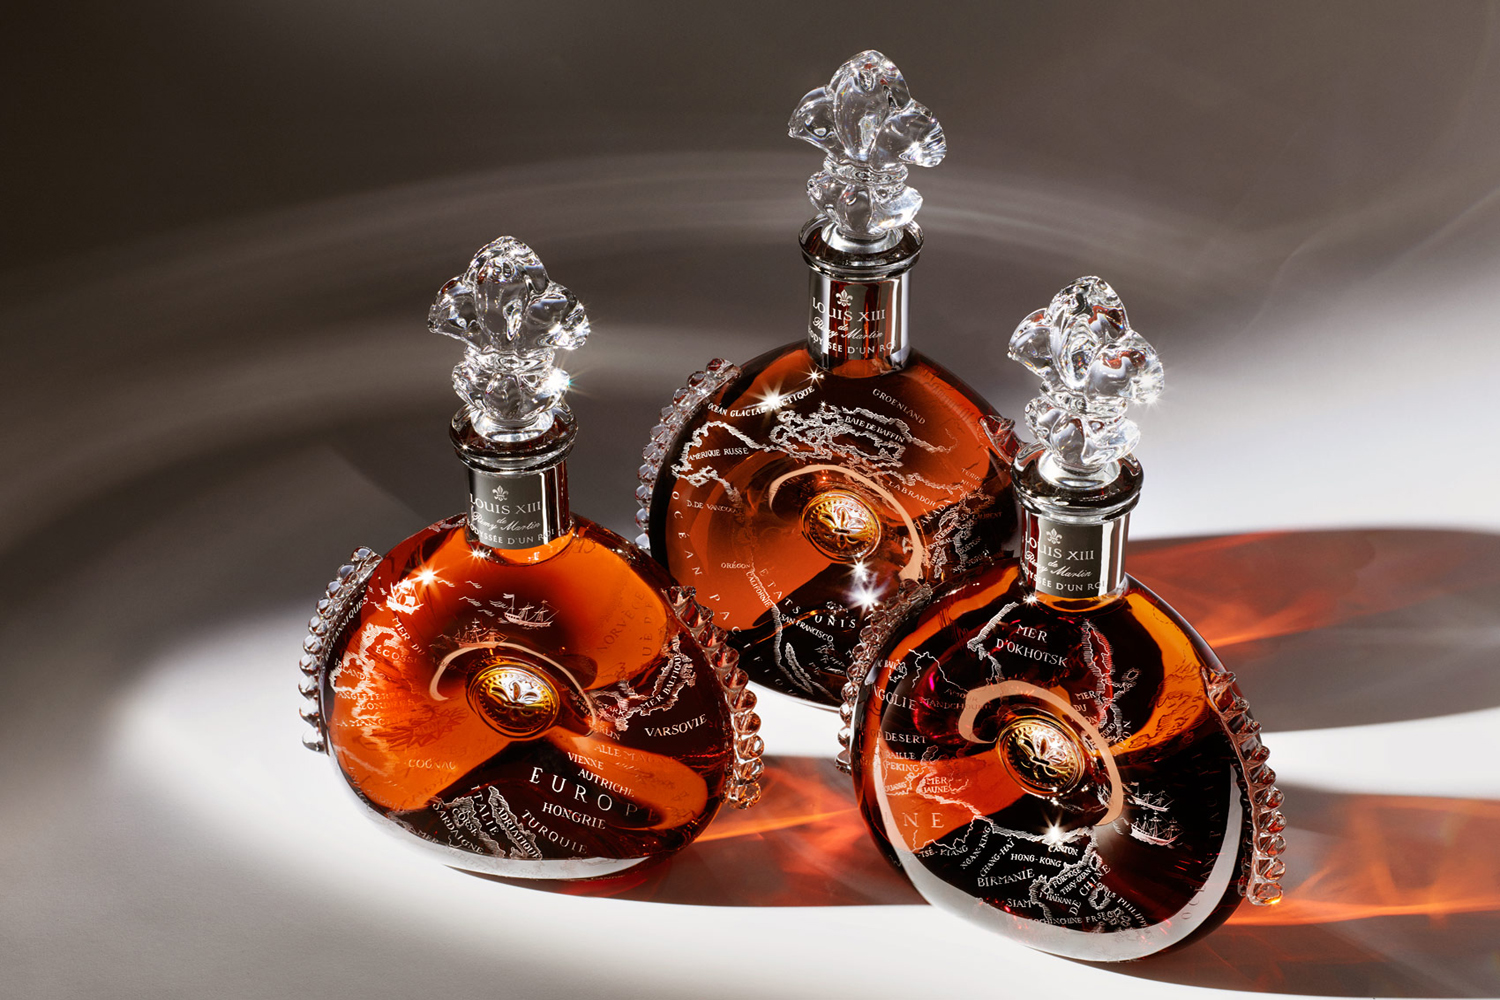 beu directory Feest The 5 Most Expensive Cognac Bottles of All Time - The Manual